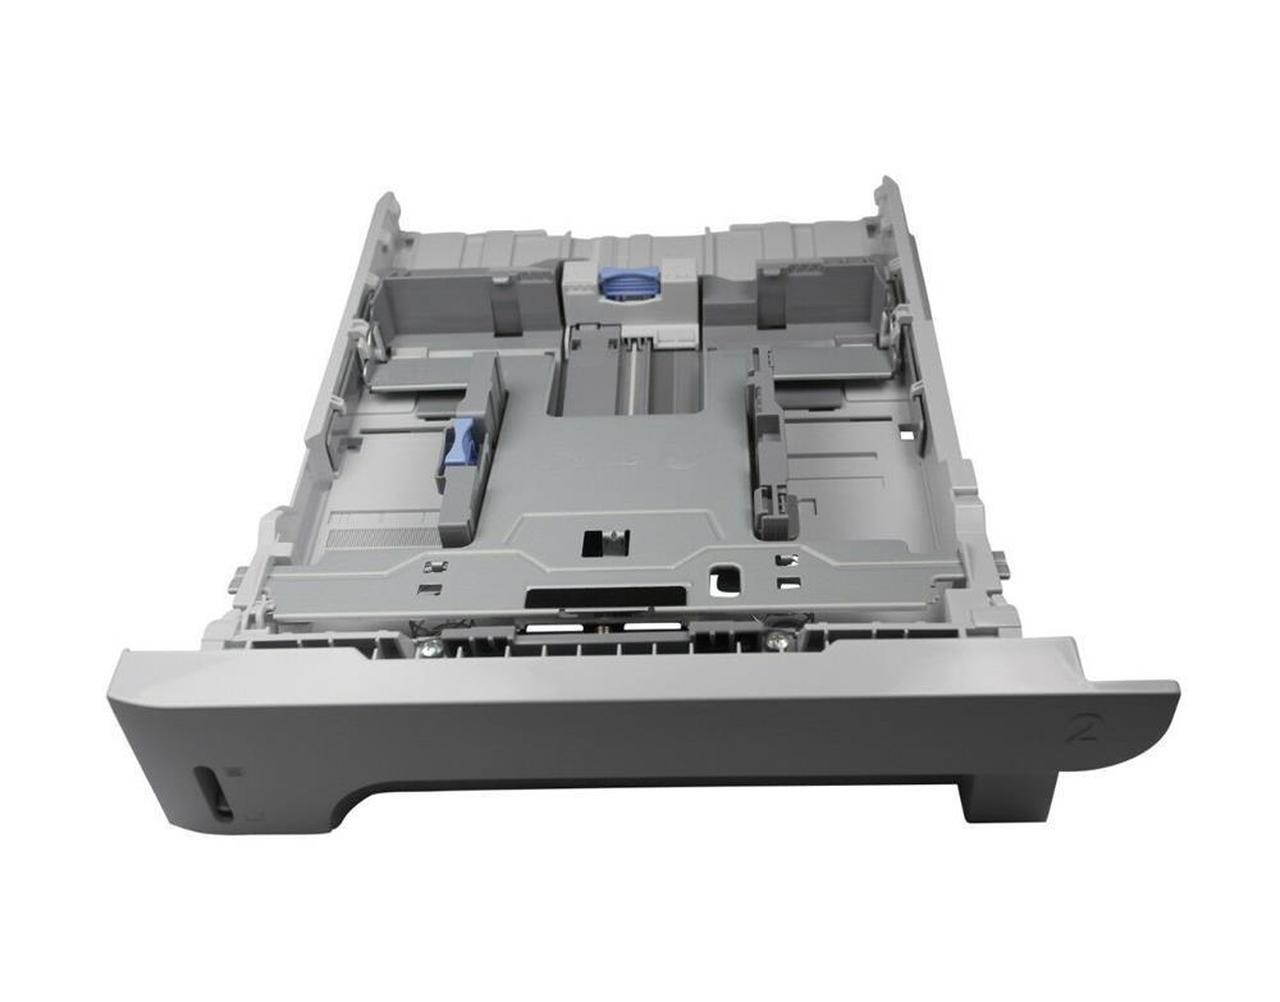 HP Refurbished RM1-6446 250 Sheet Paper Tray - Paper cassette used for tray 2